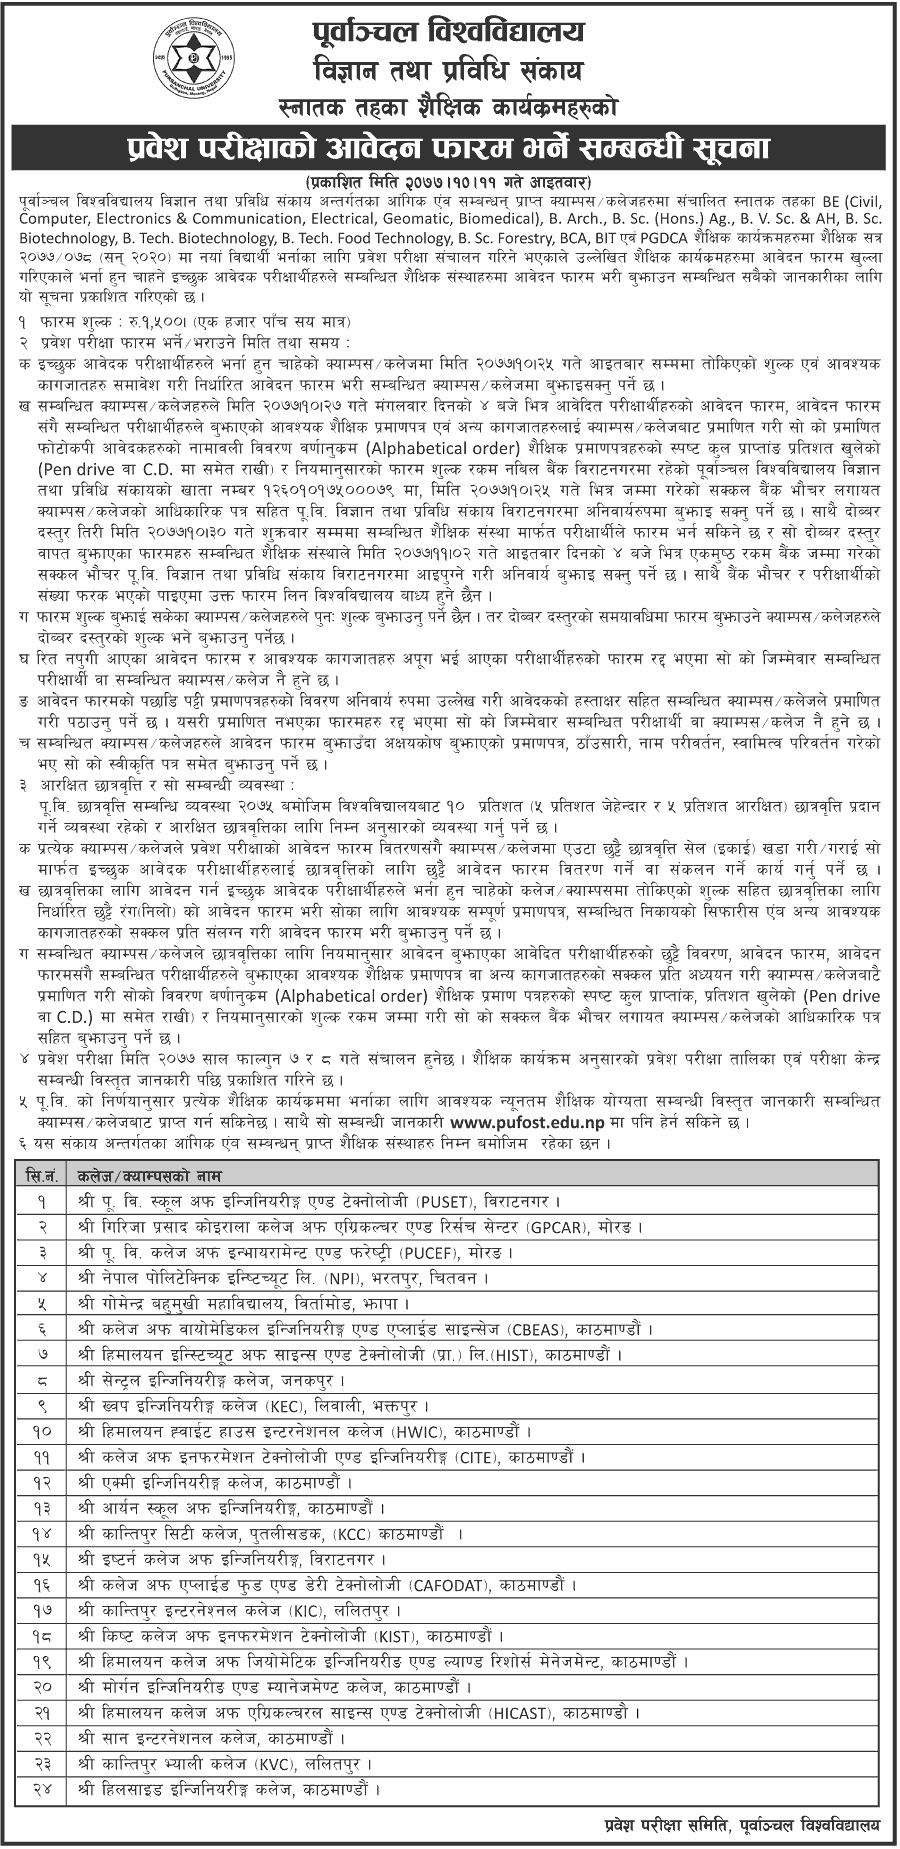 Bachelor Level (Engineering and IT) Entrance Examination Notice from Purbanchal University